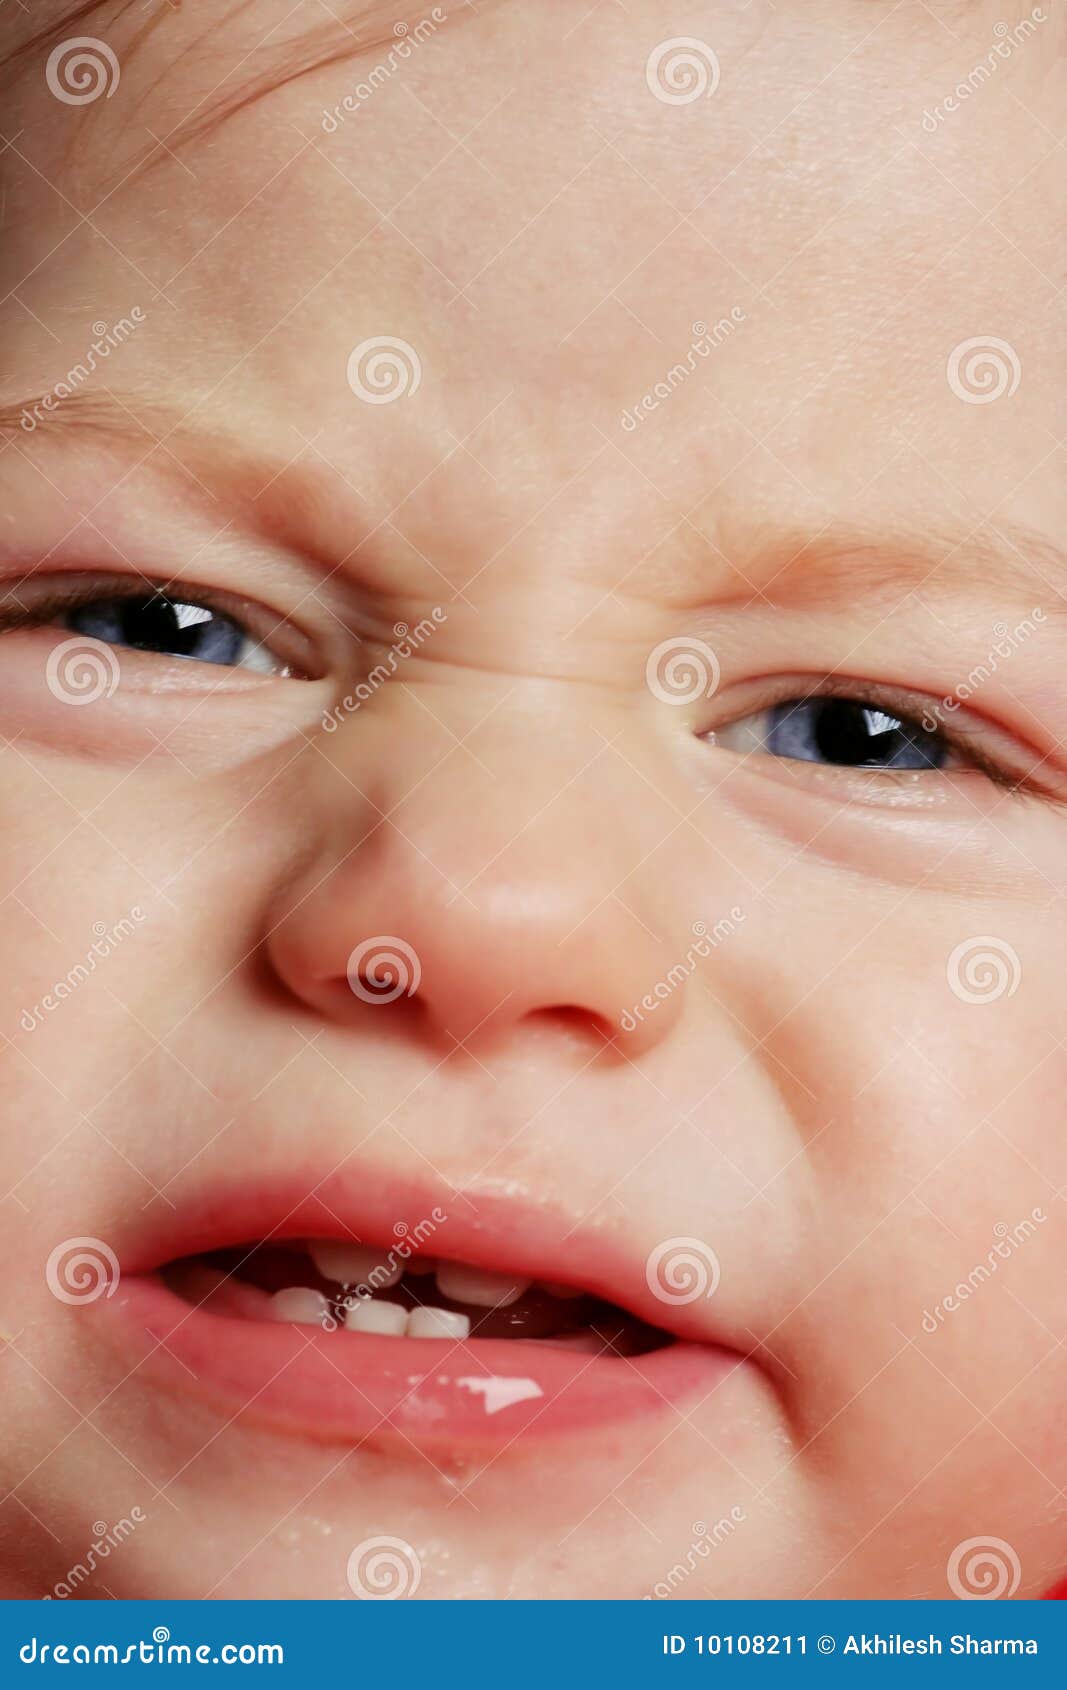 Face Closeup Of A Crying Baby Stock Image - Image: 10108211